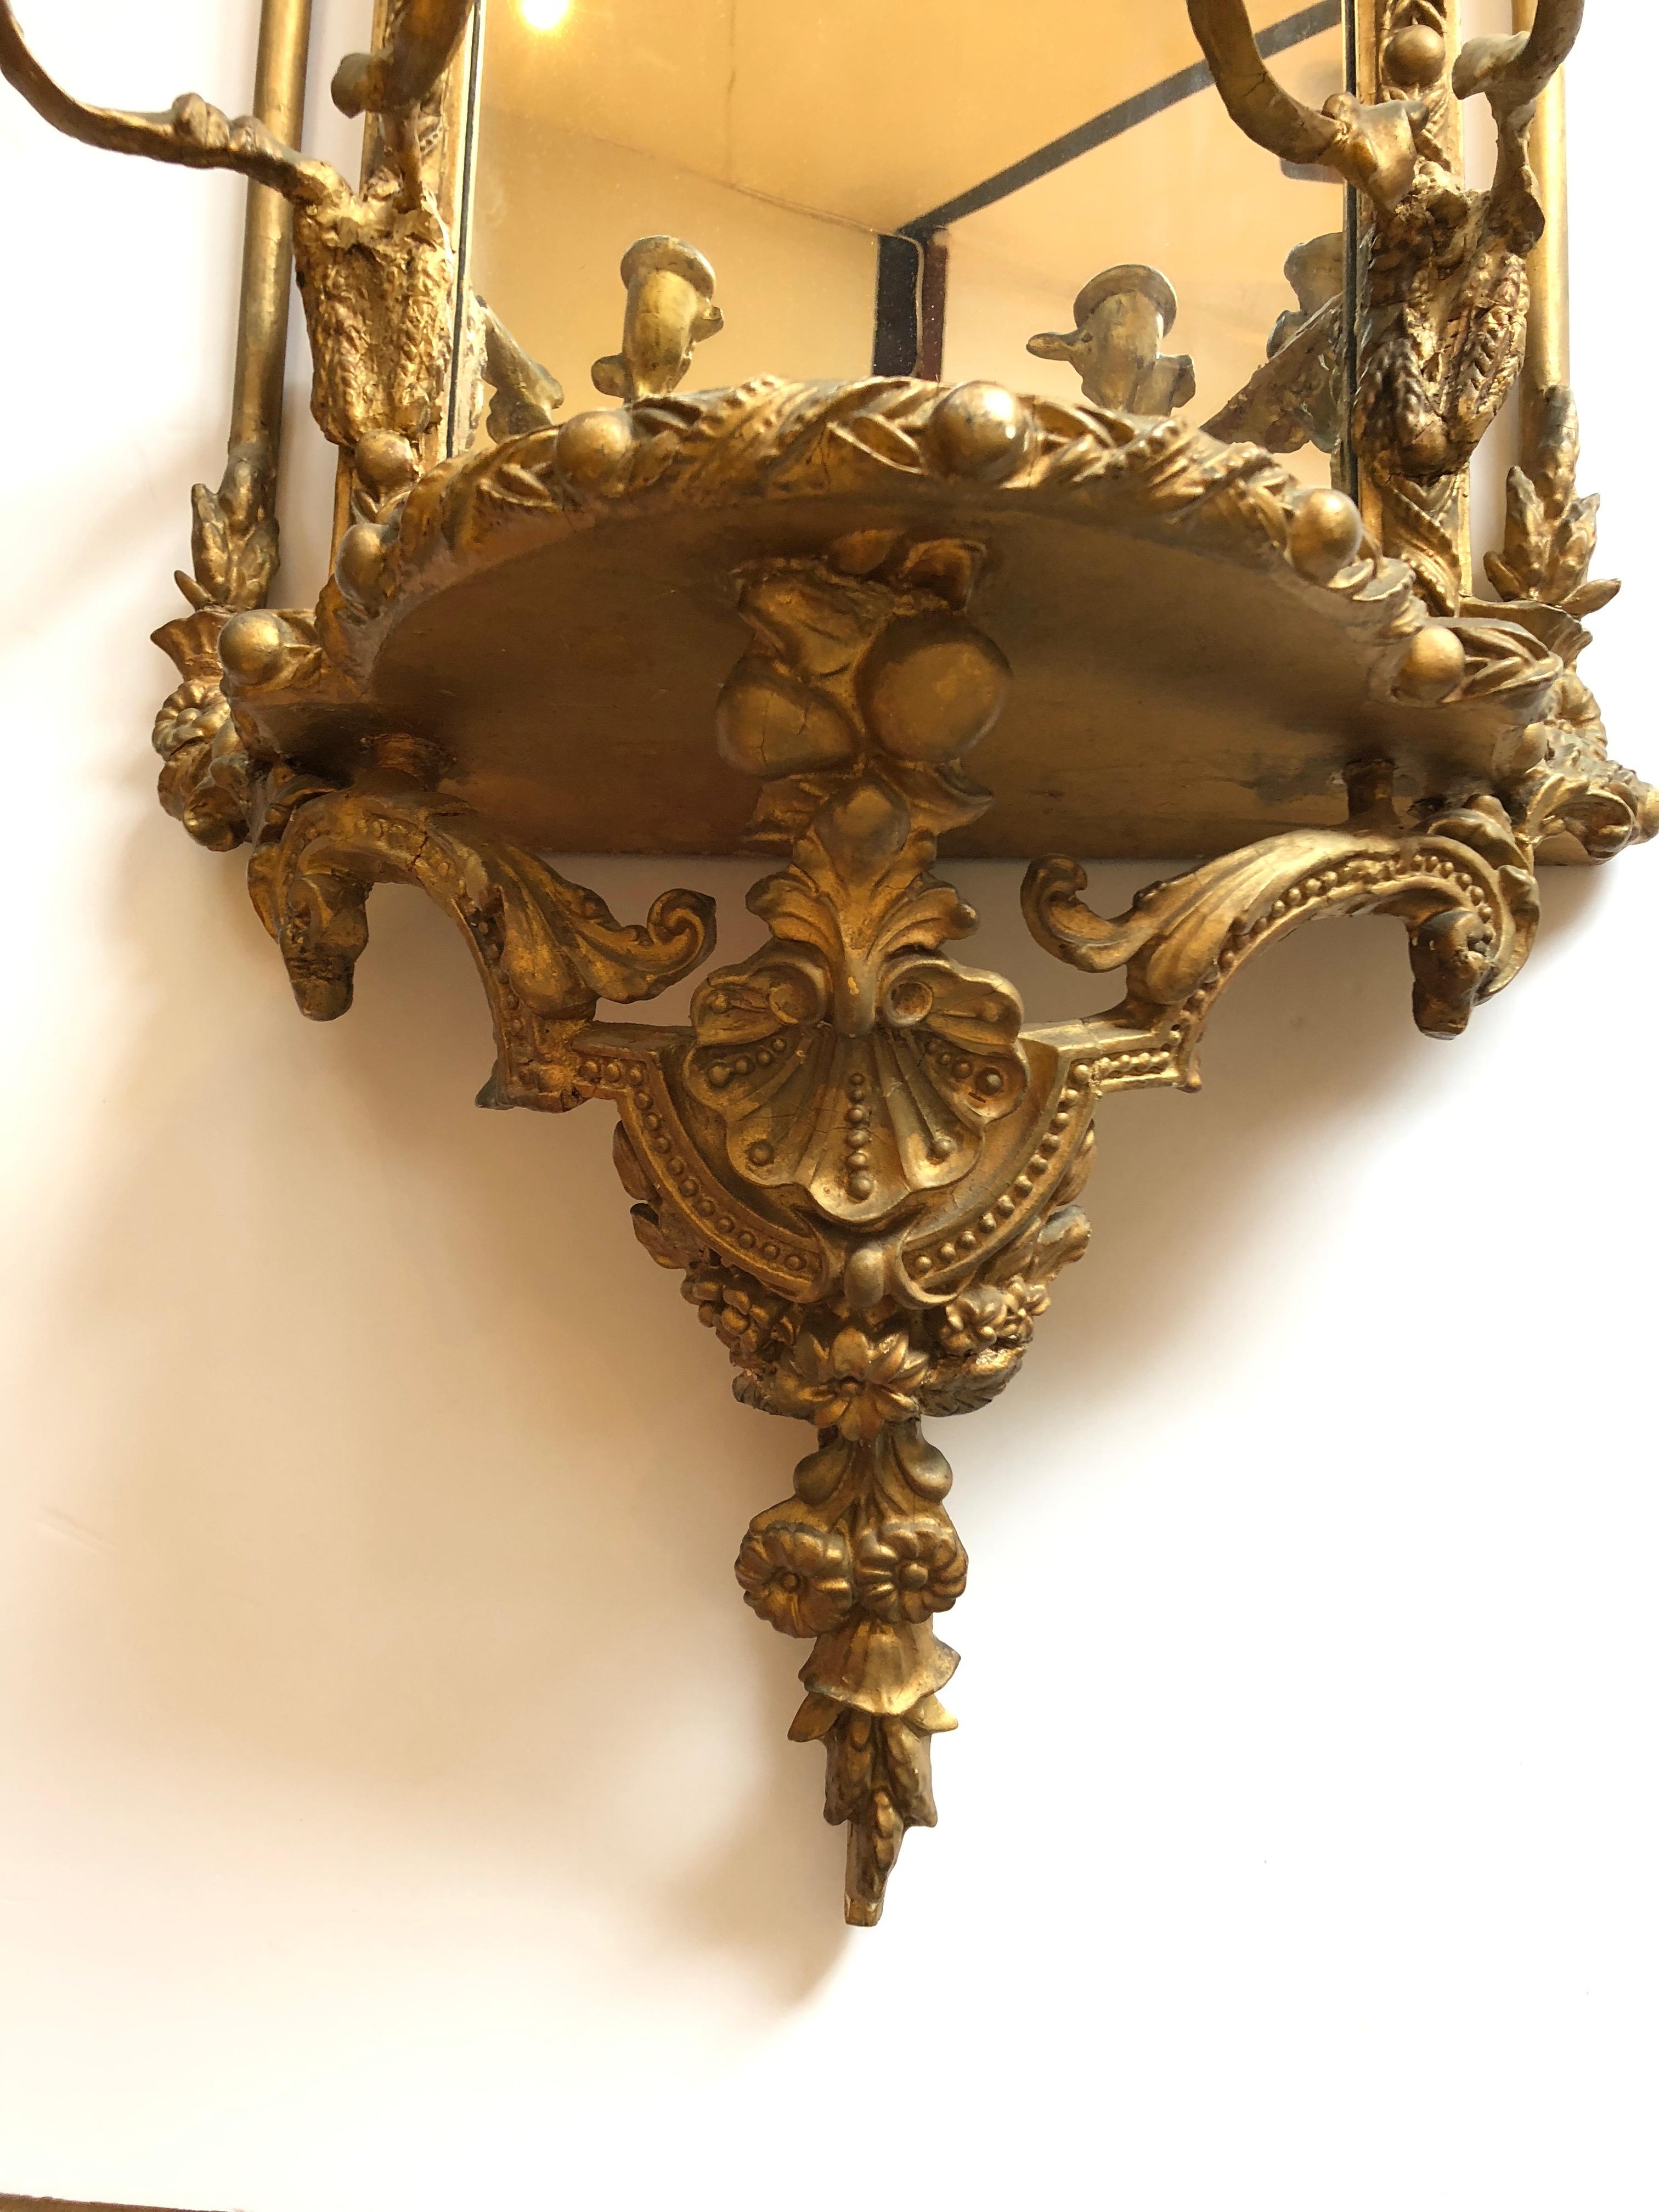 A lovely ornate French mirror having flowers, two candelabra with two candles each, a small protruding shelf, and intricate bow with eagle at the top. Has some losses and repairs, but a lot of character and charm for the price.